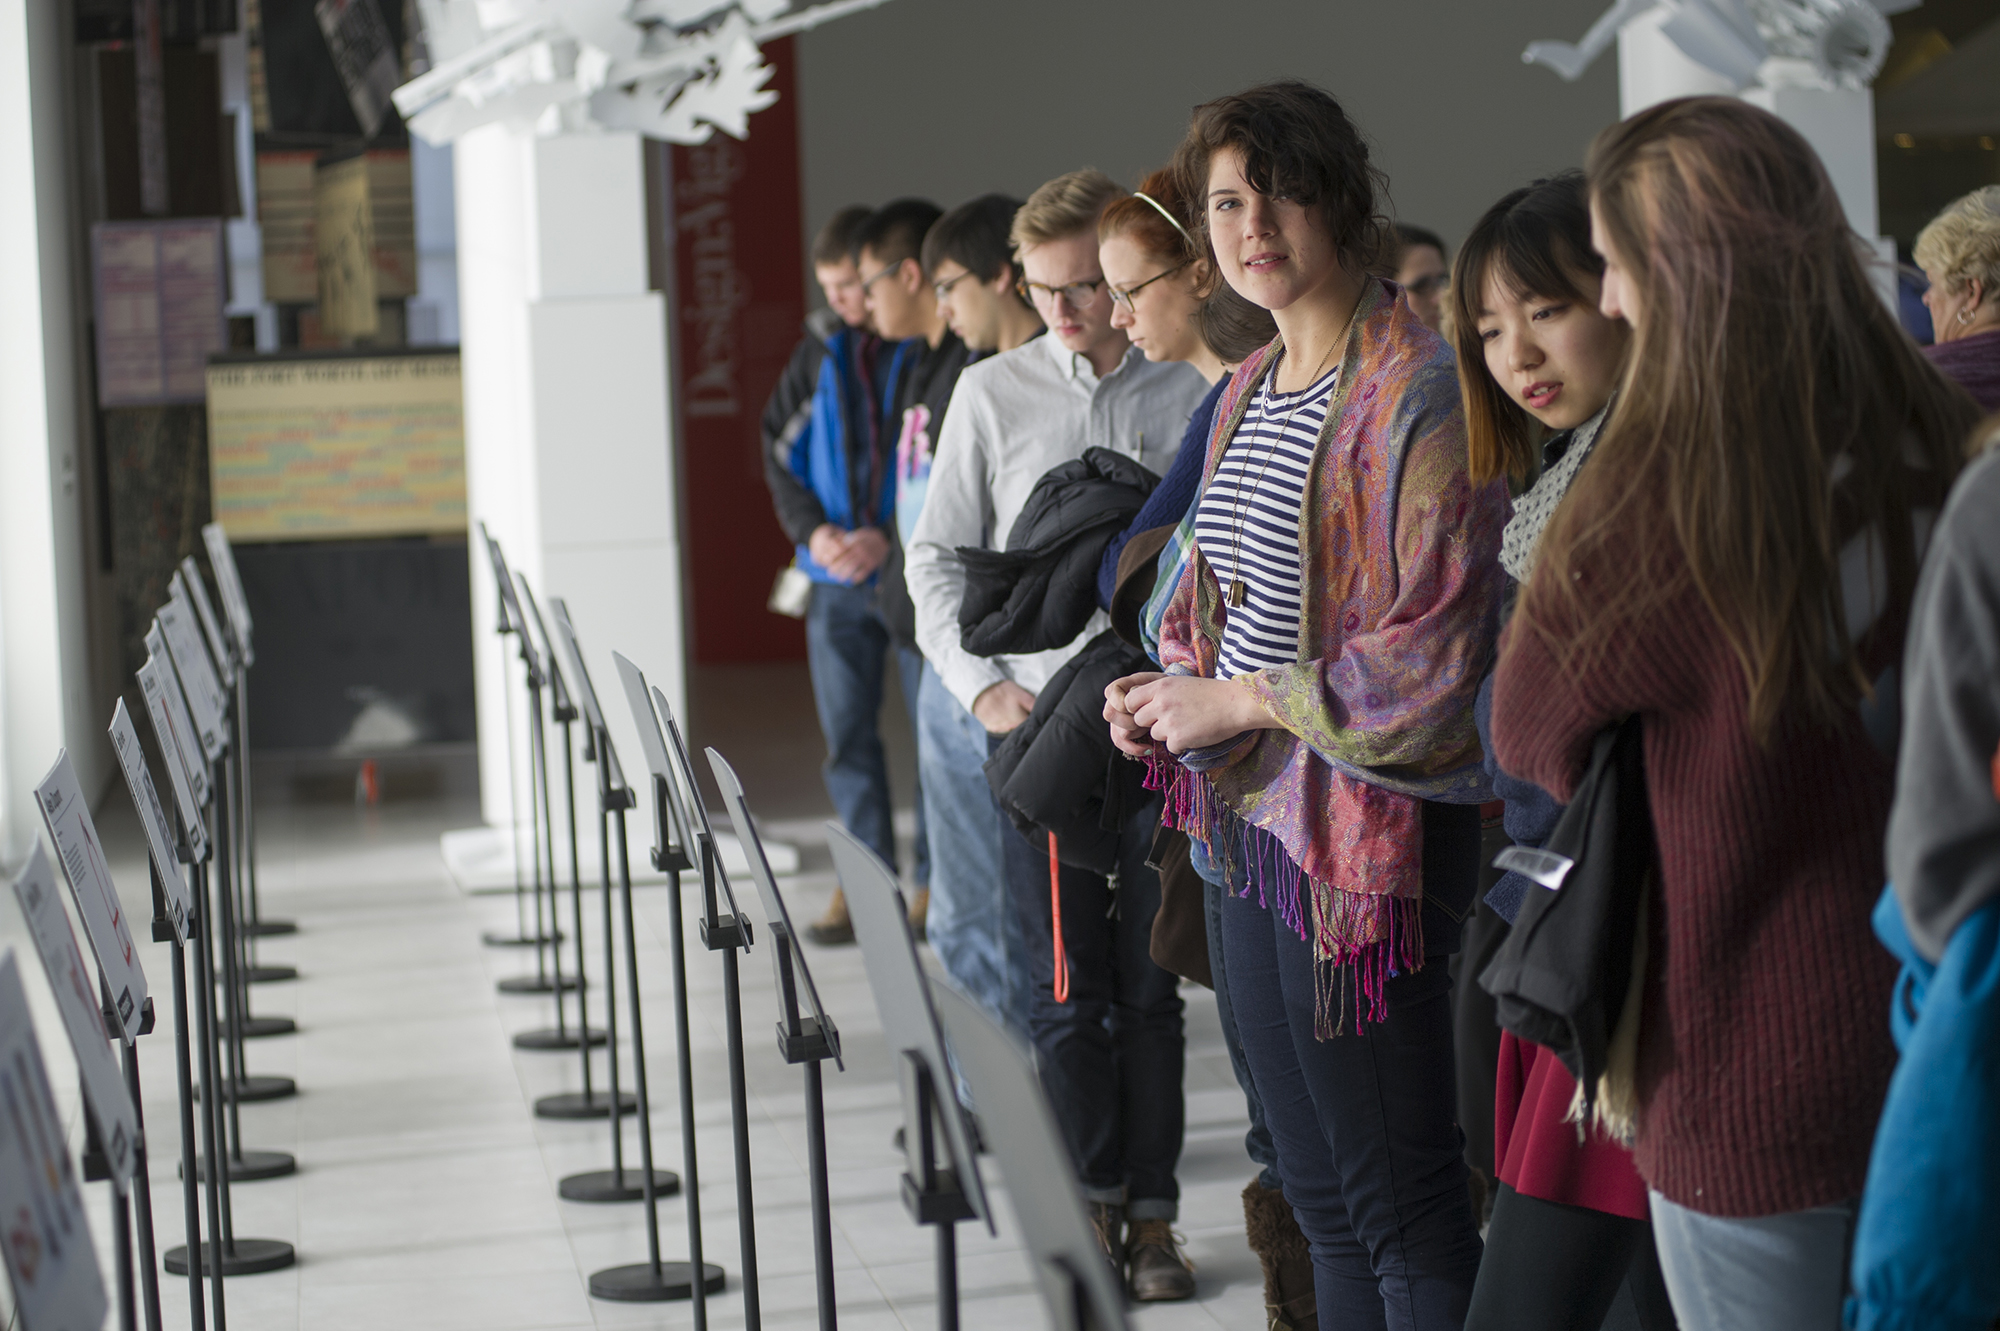 A group of students stand in University Gallery.